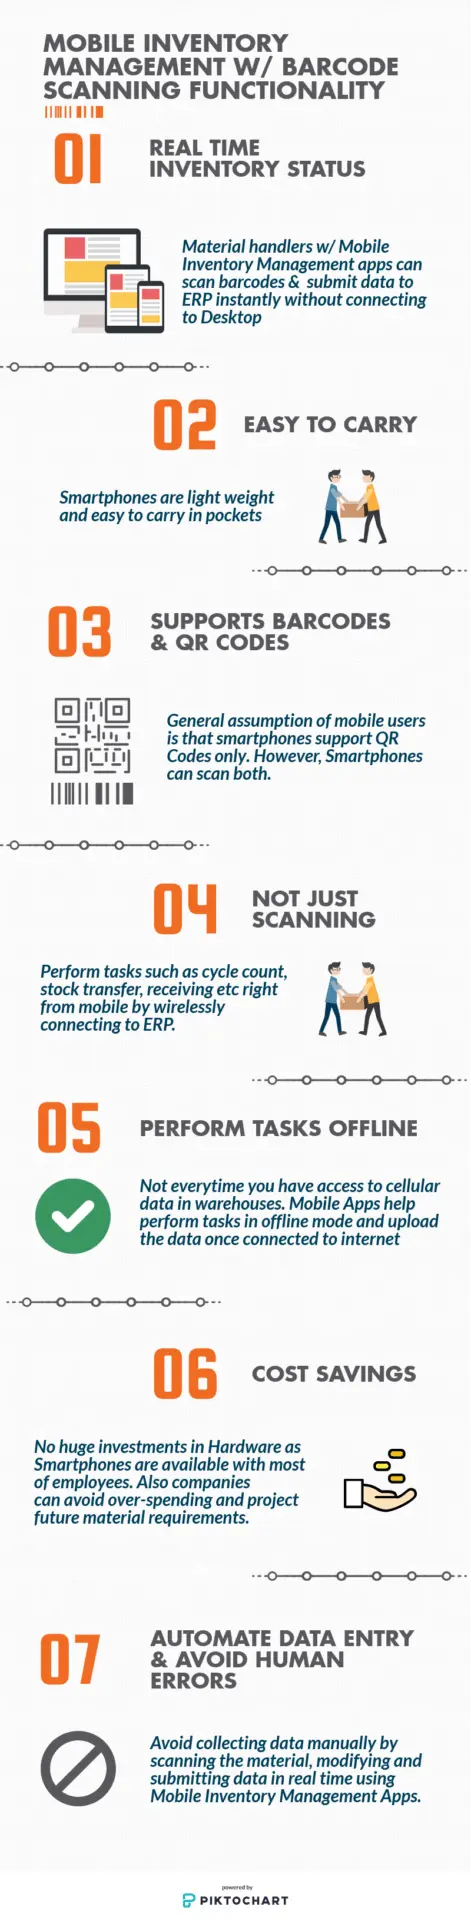 Inventory-Management-Barcode-Scanning-Infographic